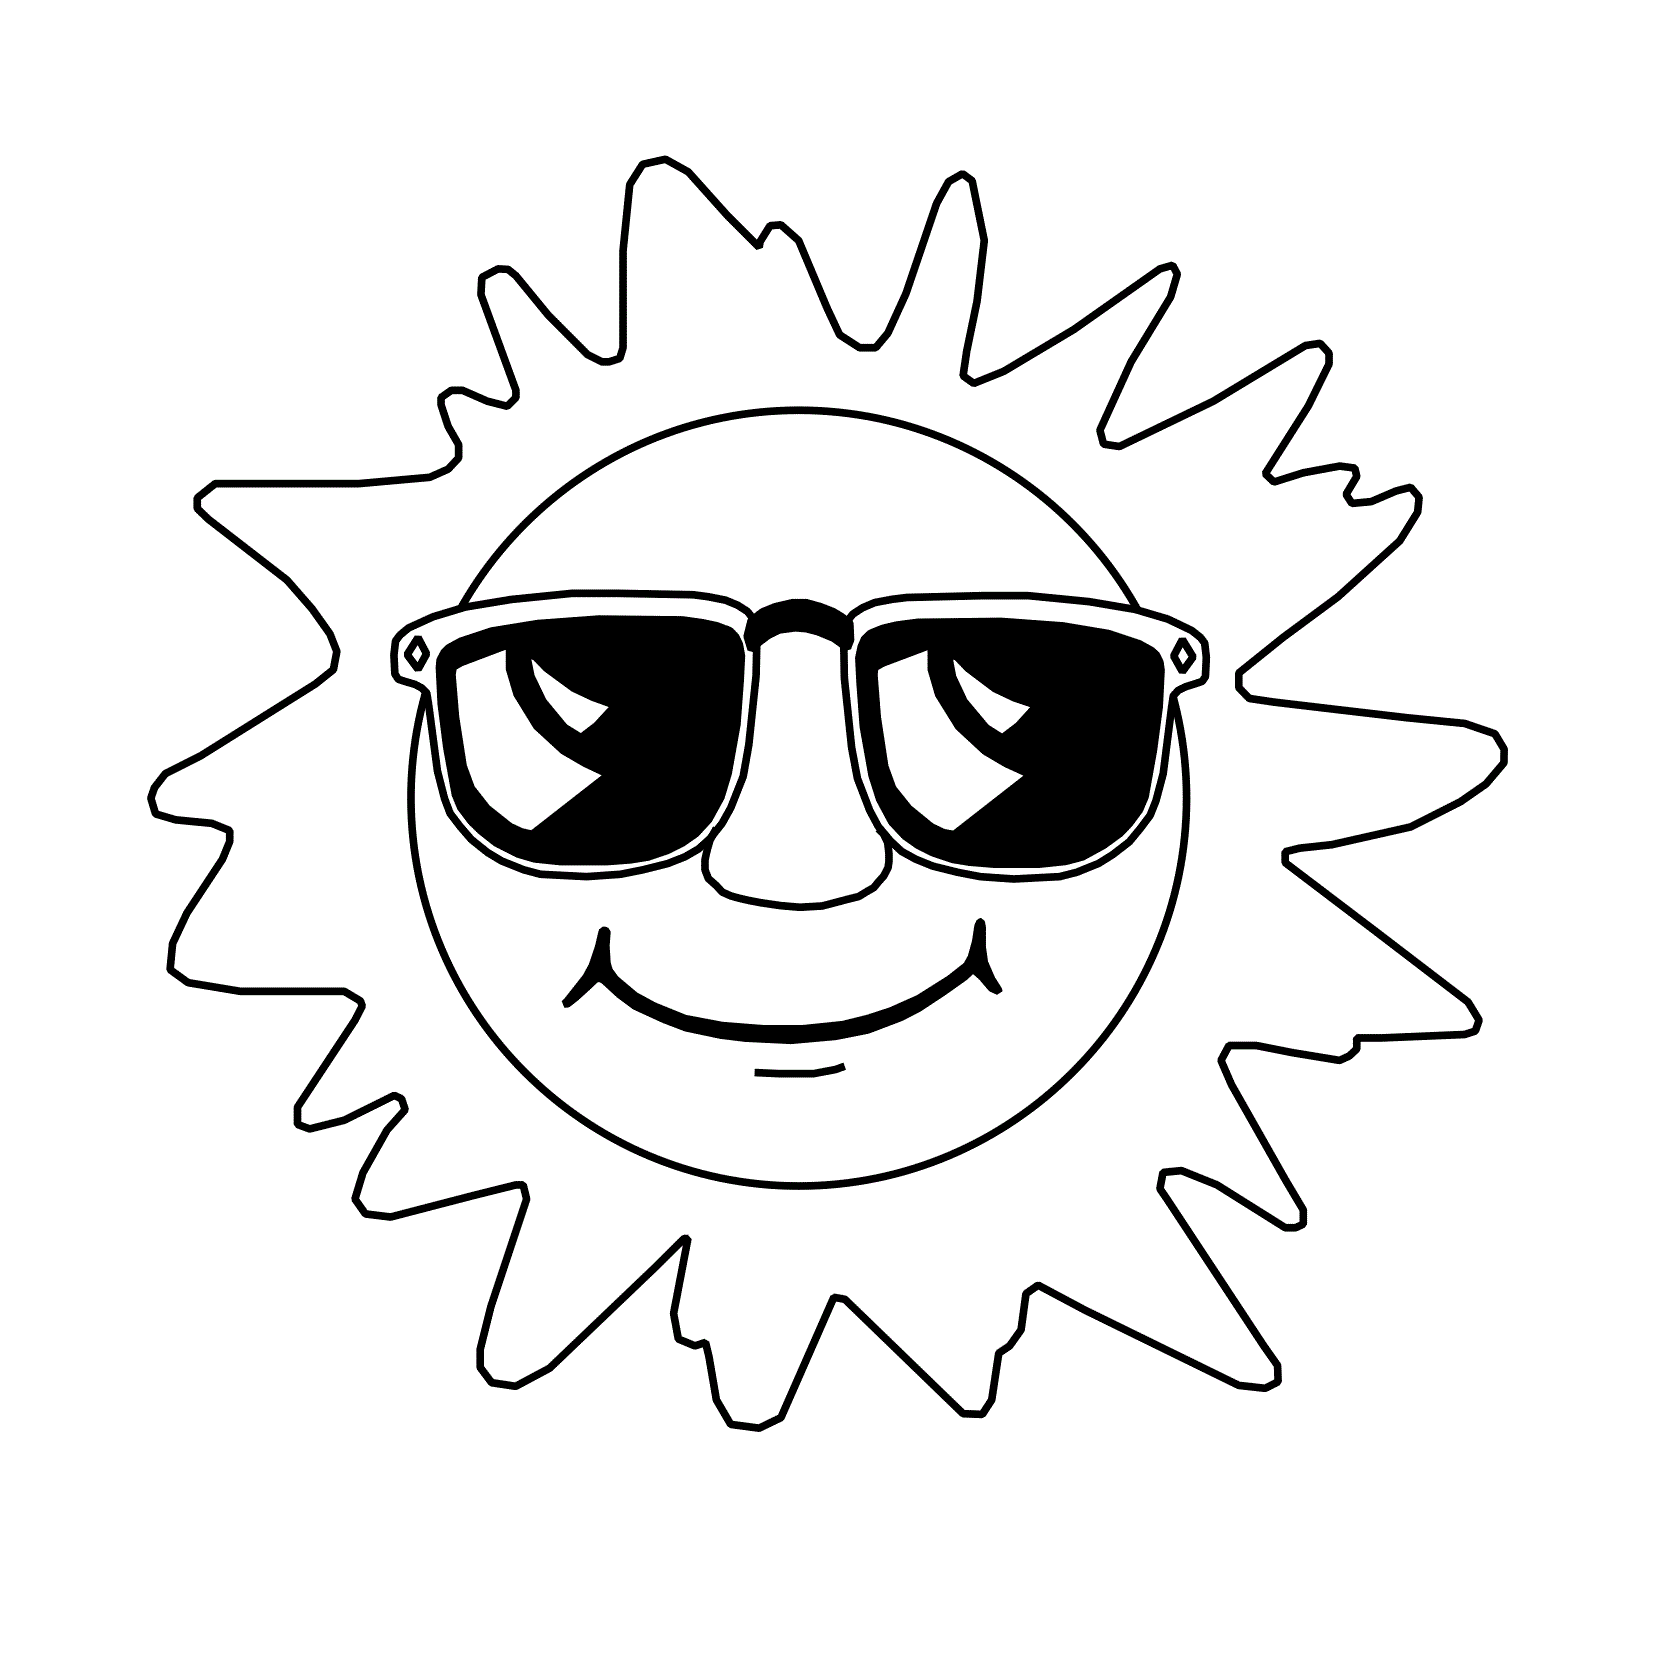 Free Coloring Page Of A Sun Download Free Coloring Page Of A Sun Png 